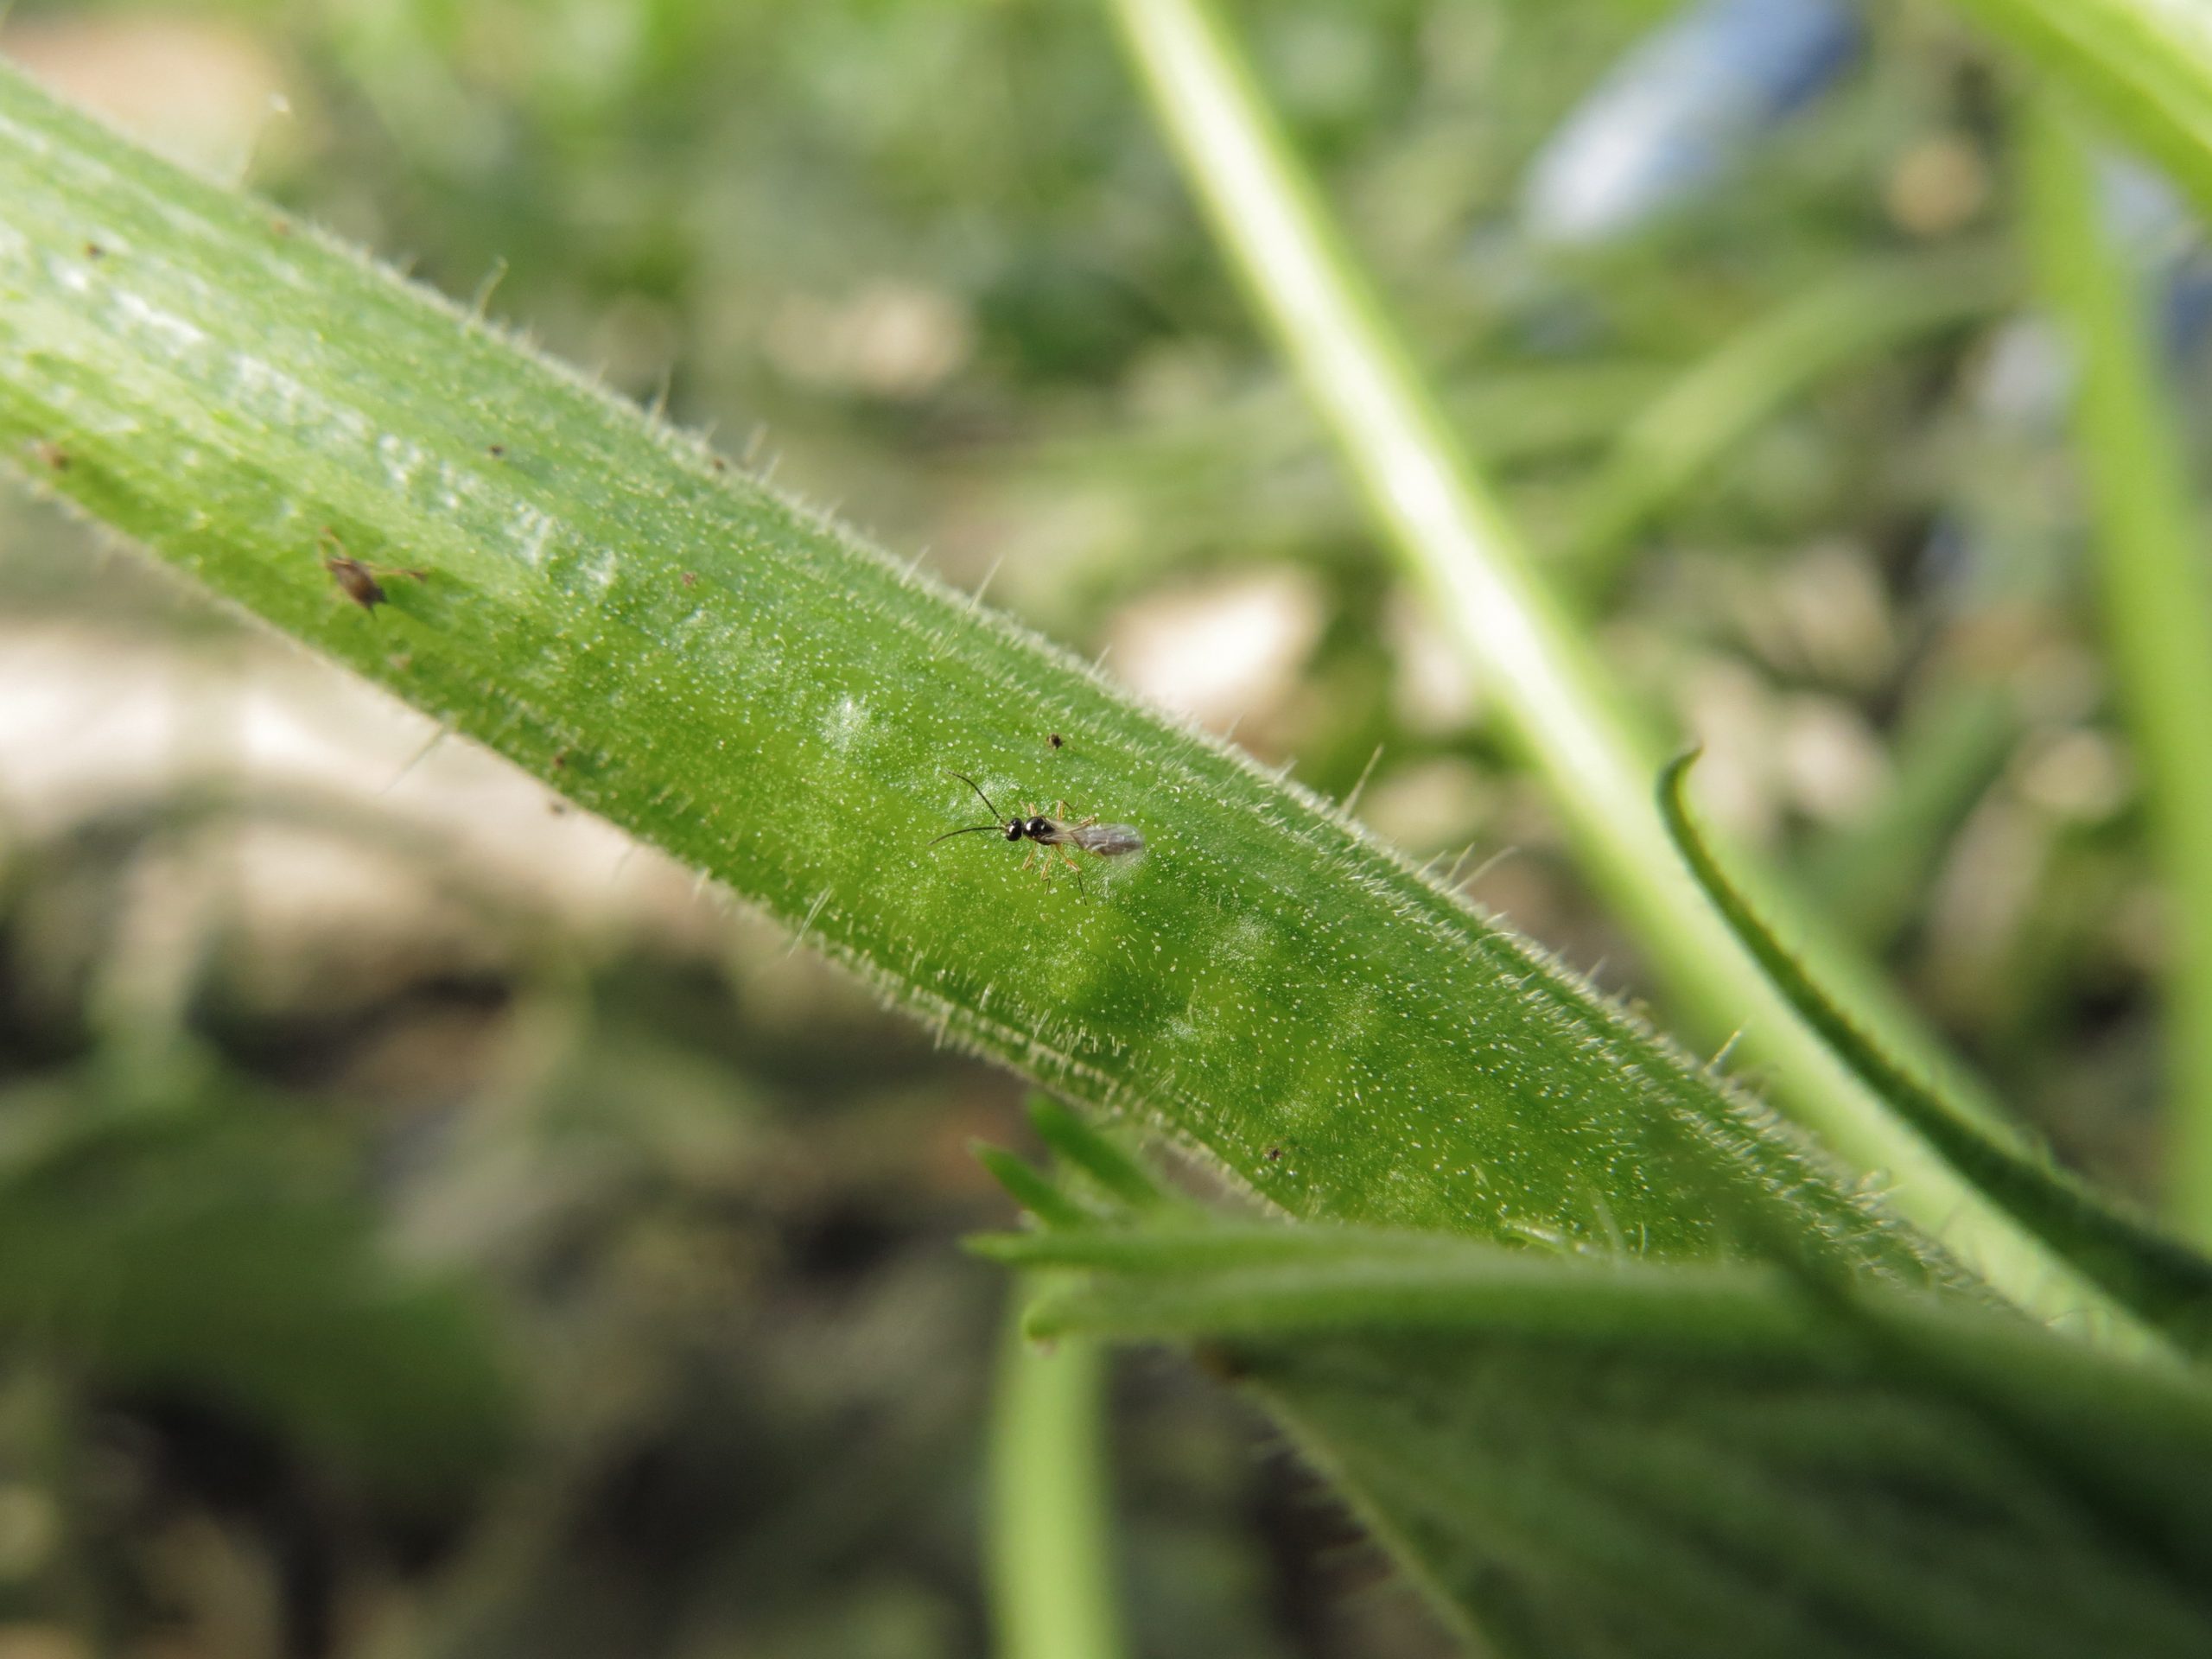 Whether they are used in a preventive or a curative approach, parasitic wasps and gall midges are the cornerstone of a reliable aphid control strategy.